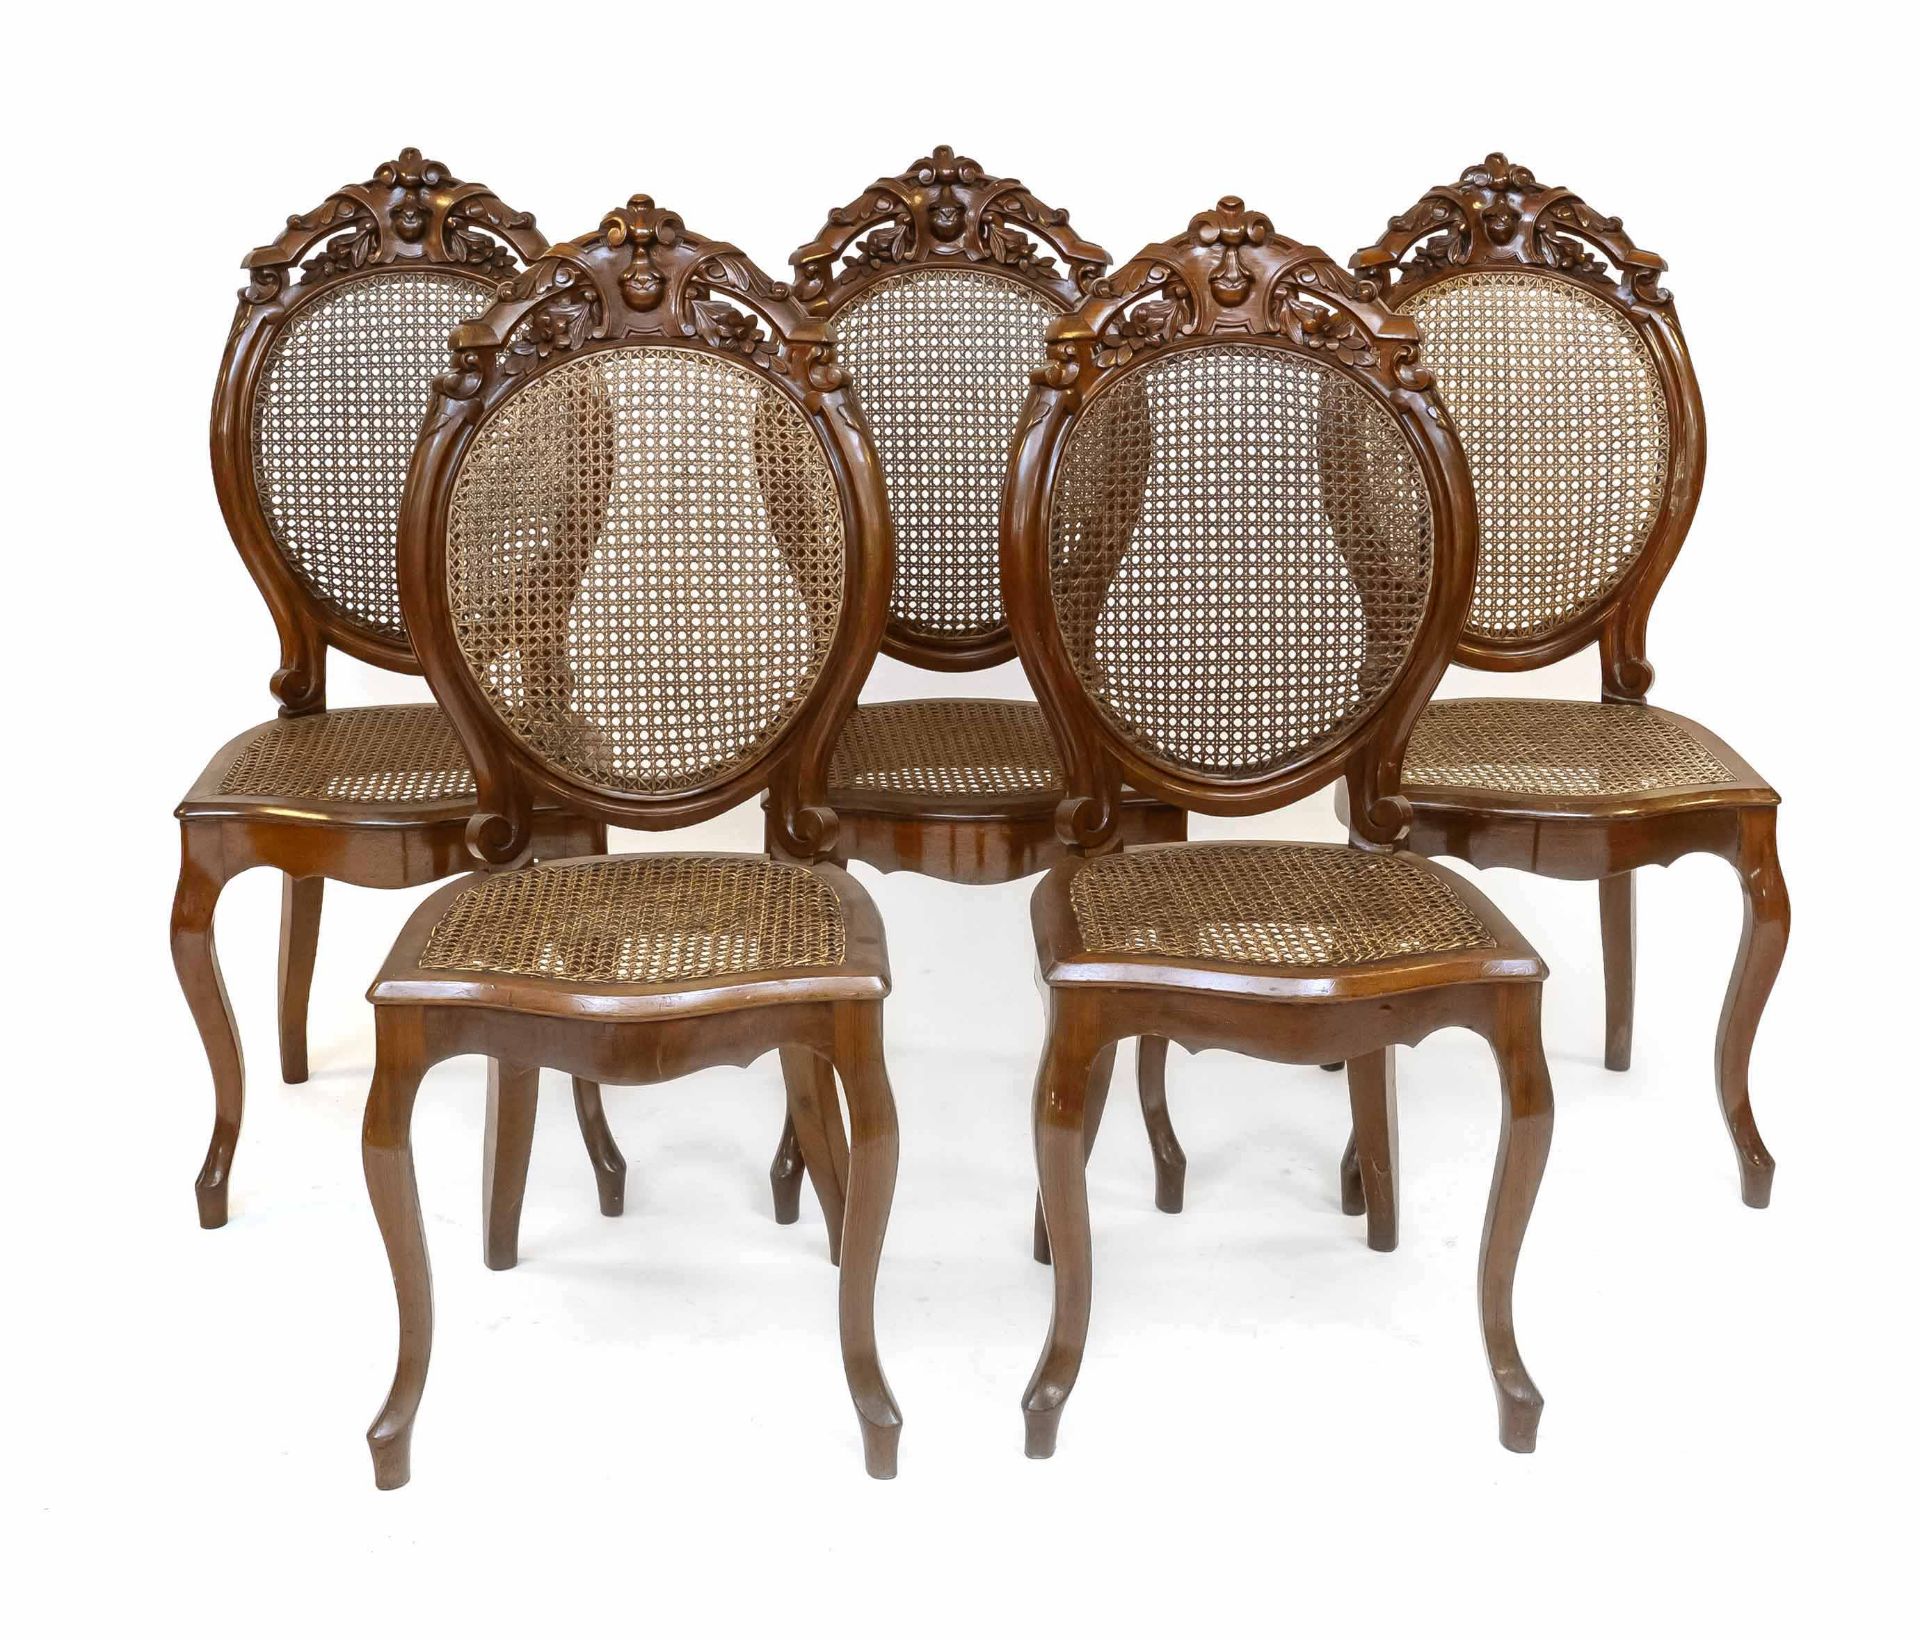 5 chairs, Louis-Phillipe c. 1860, mahogany, wickerwork, 109 x 45 x 55 cm - The furniture cannot be